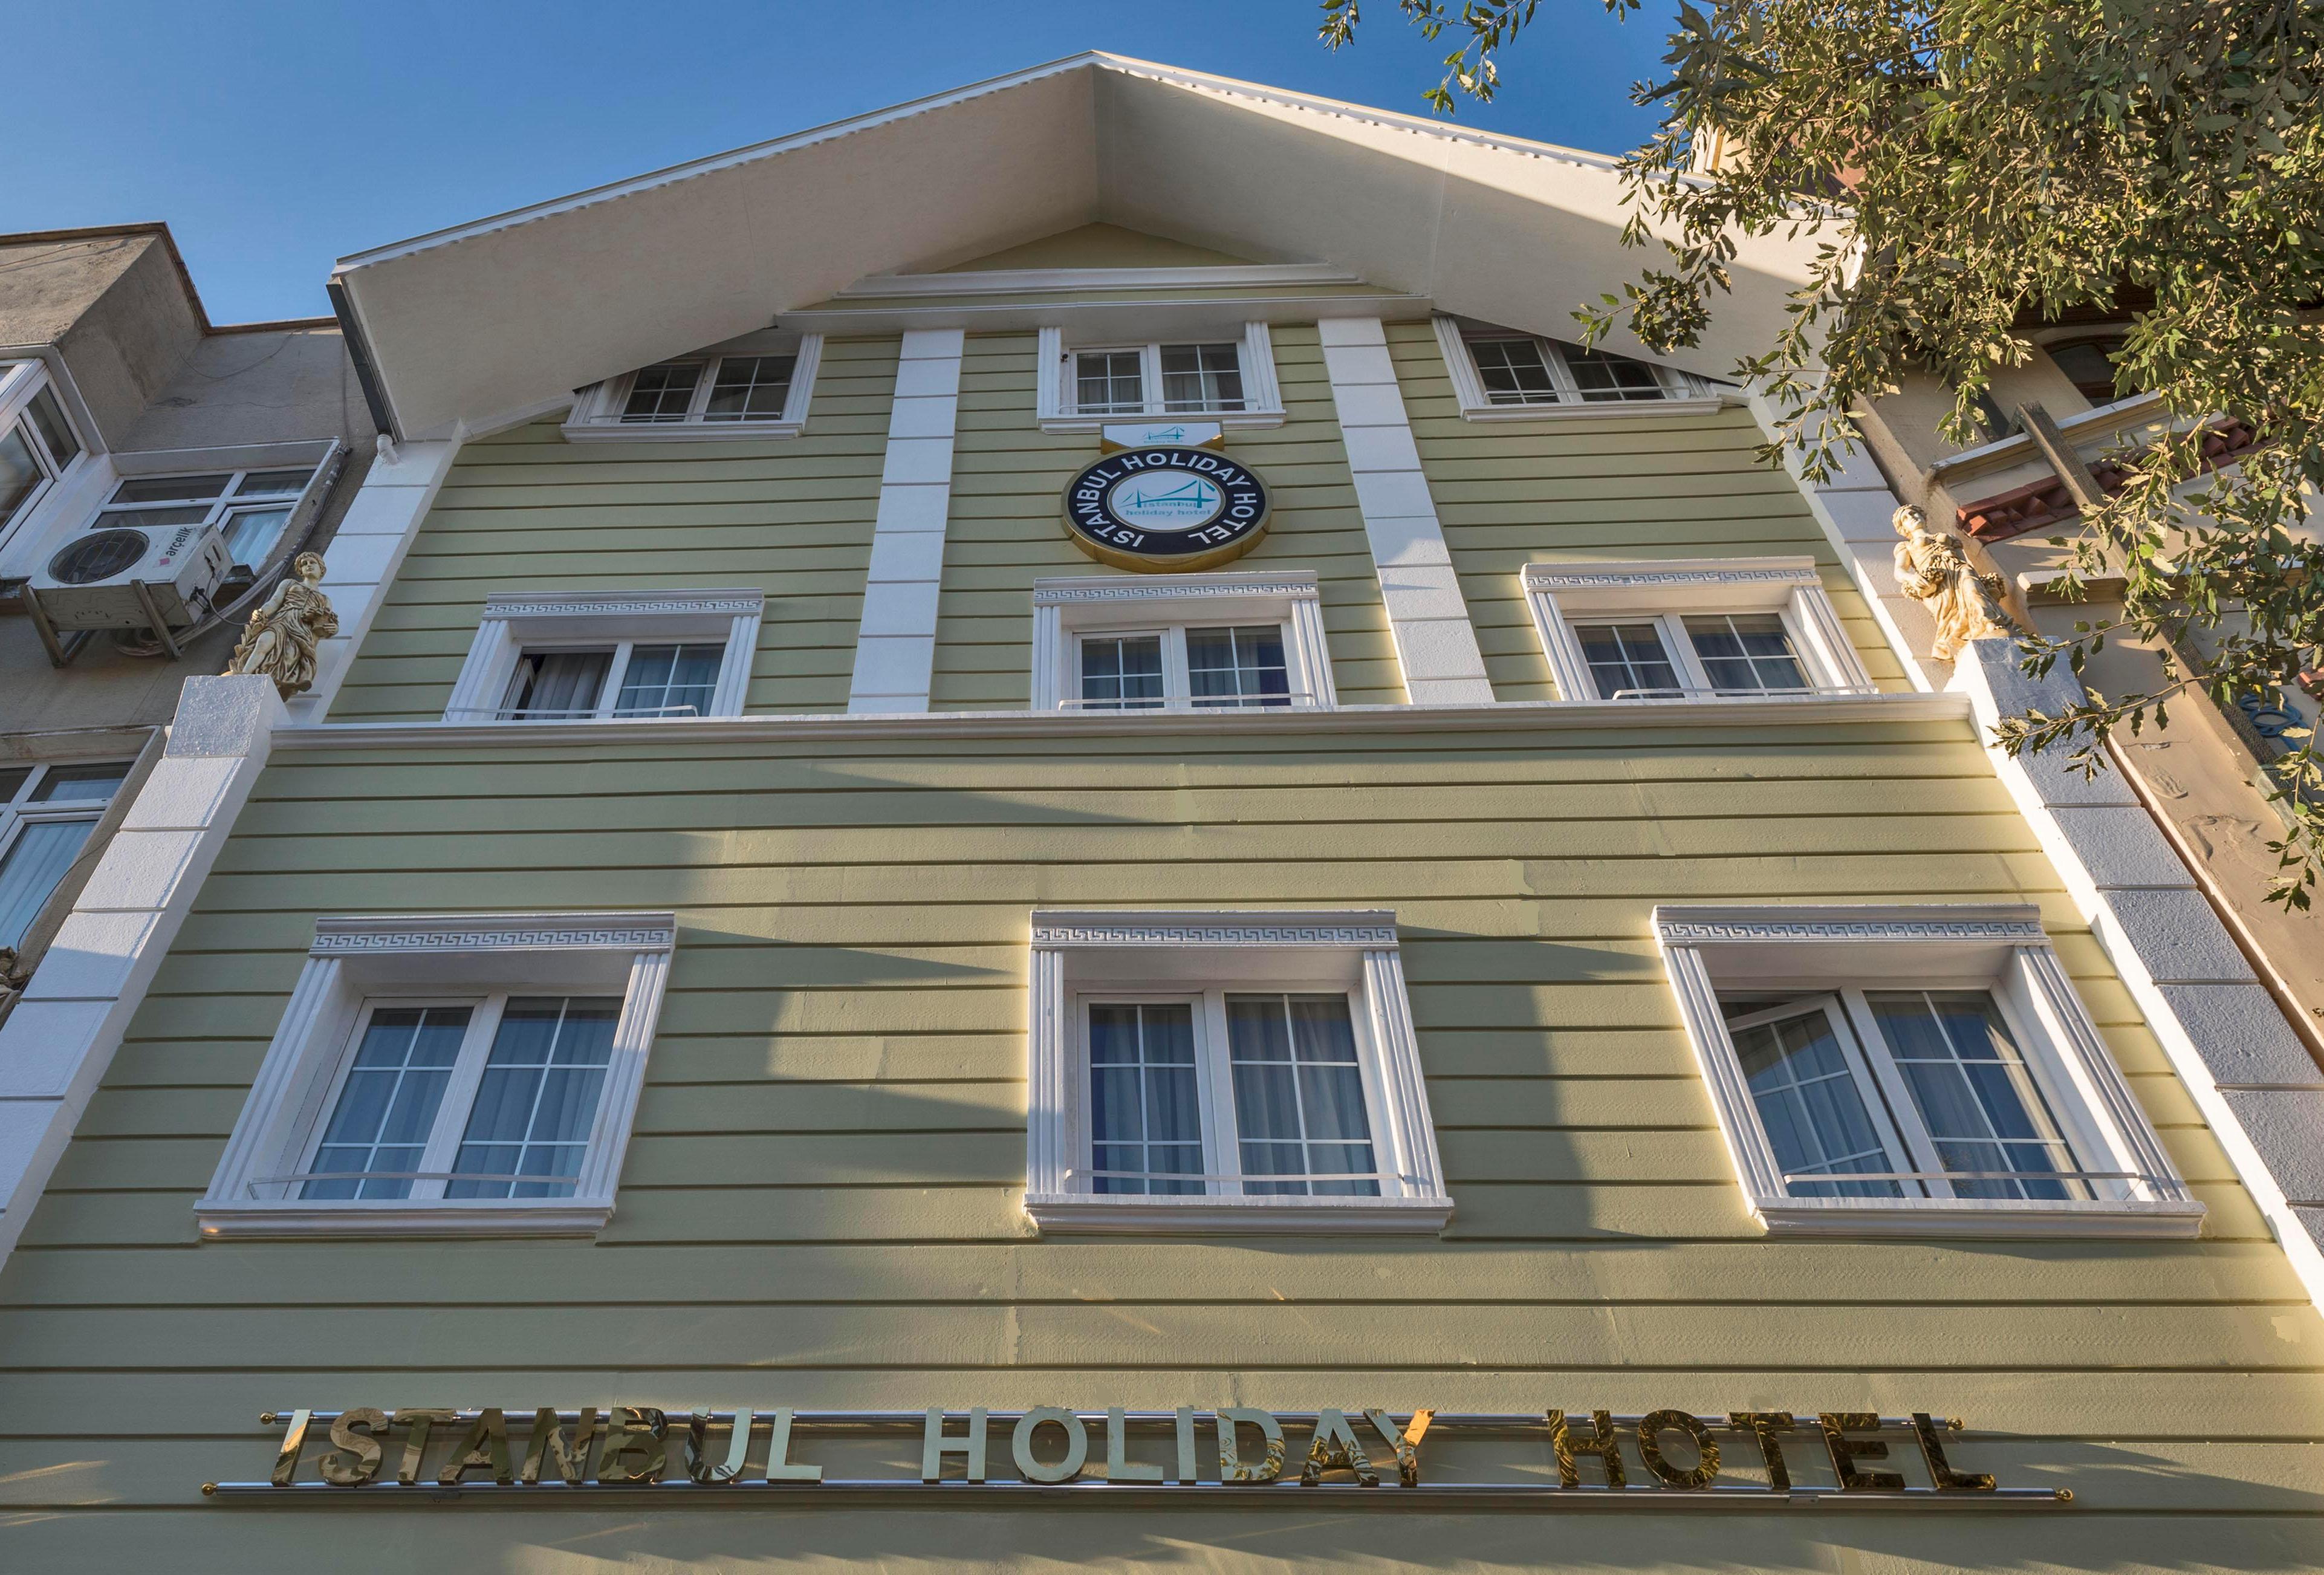 Istanbul Holiday Hotel Exterior foto